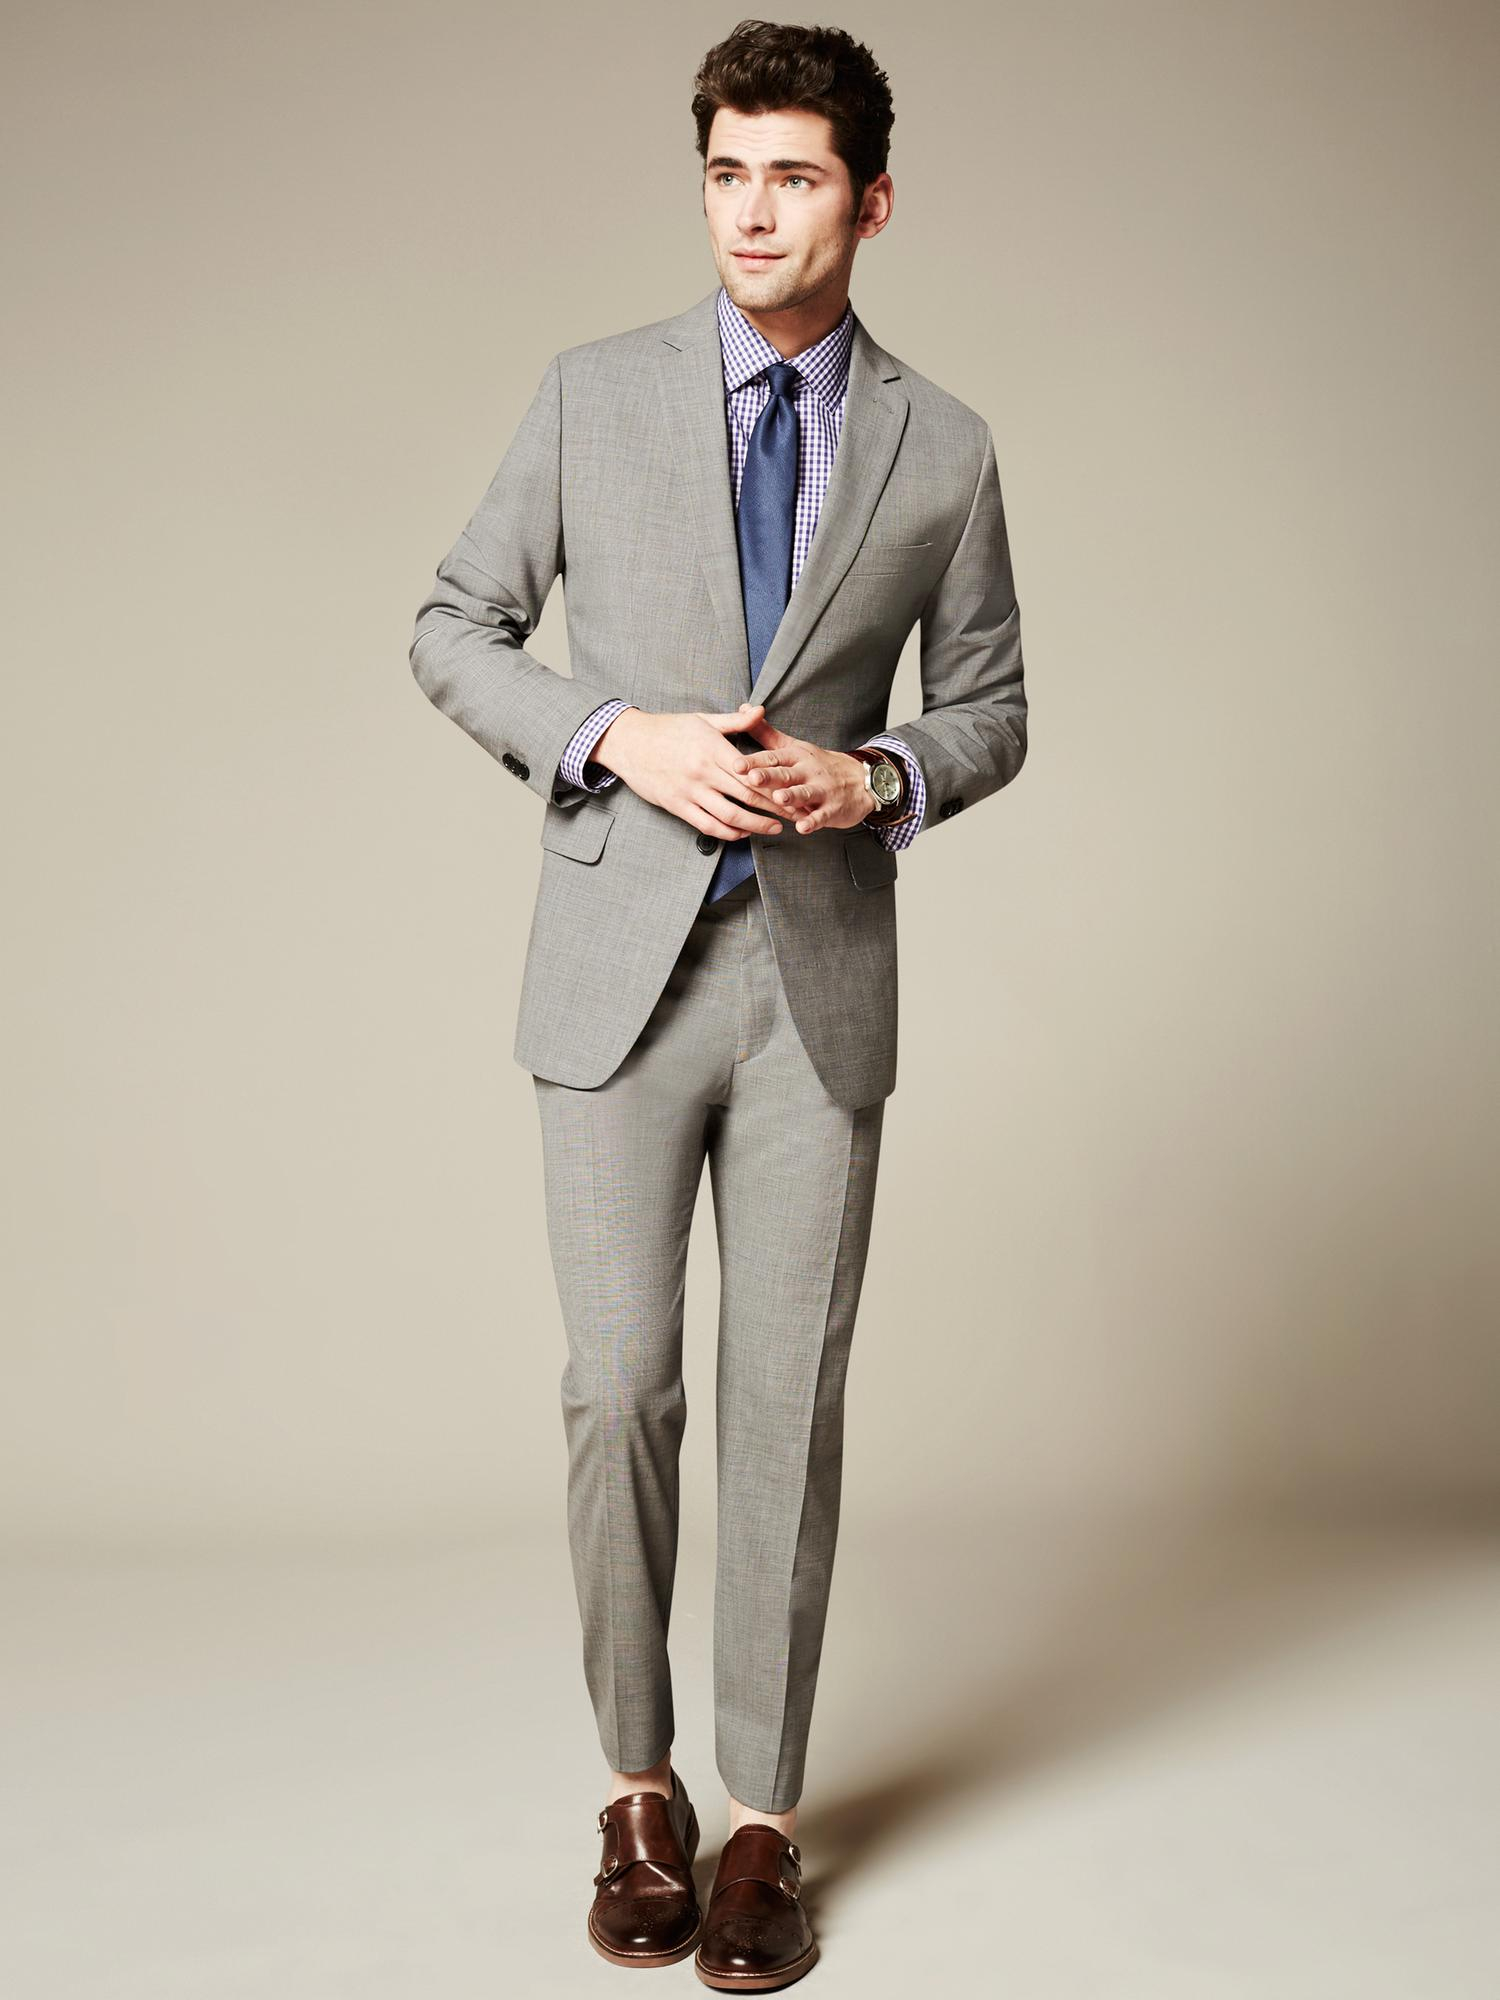 Lyst - Banana Republic Tailored-Fit Textured Grey Wool Suit Jacket in ...